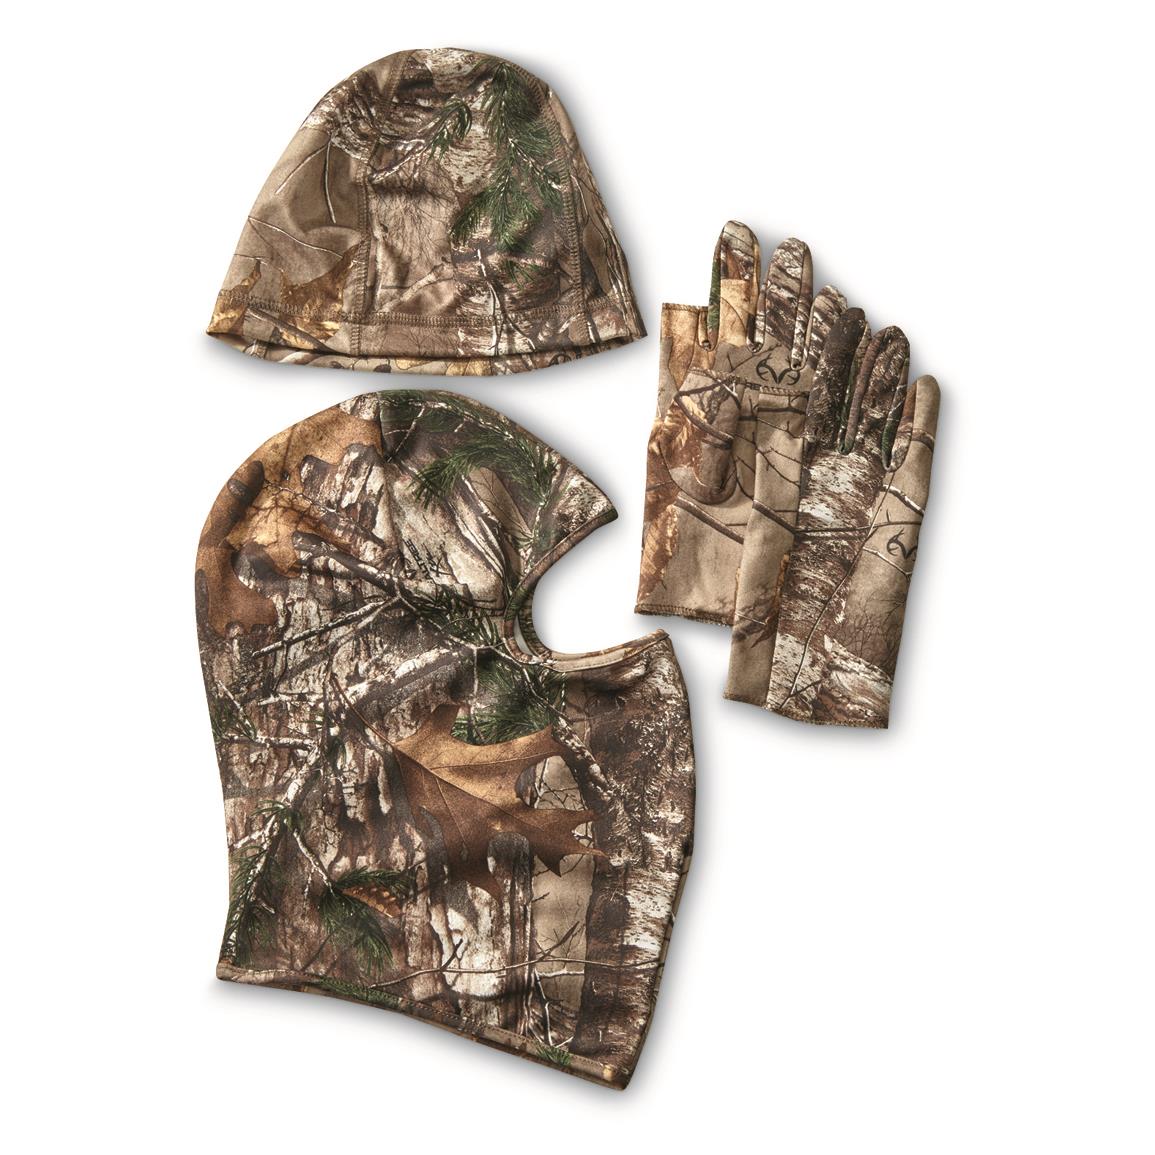 Set includes Facemask, Gloves and Beanie, Realtree Xtra®